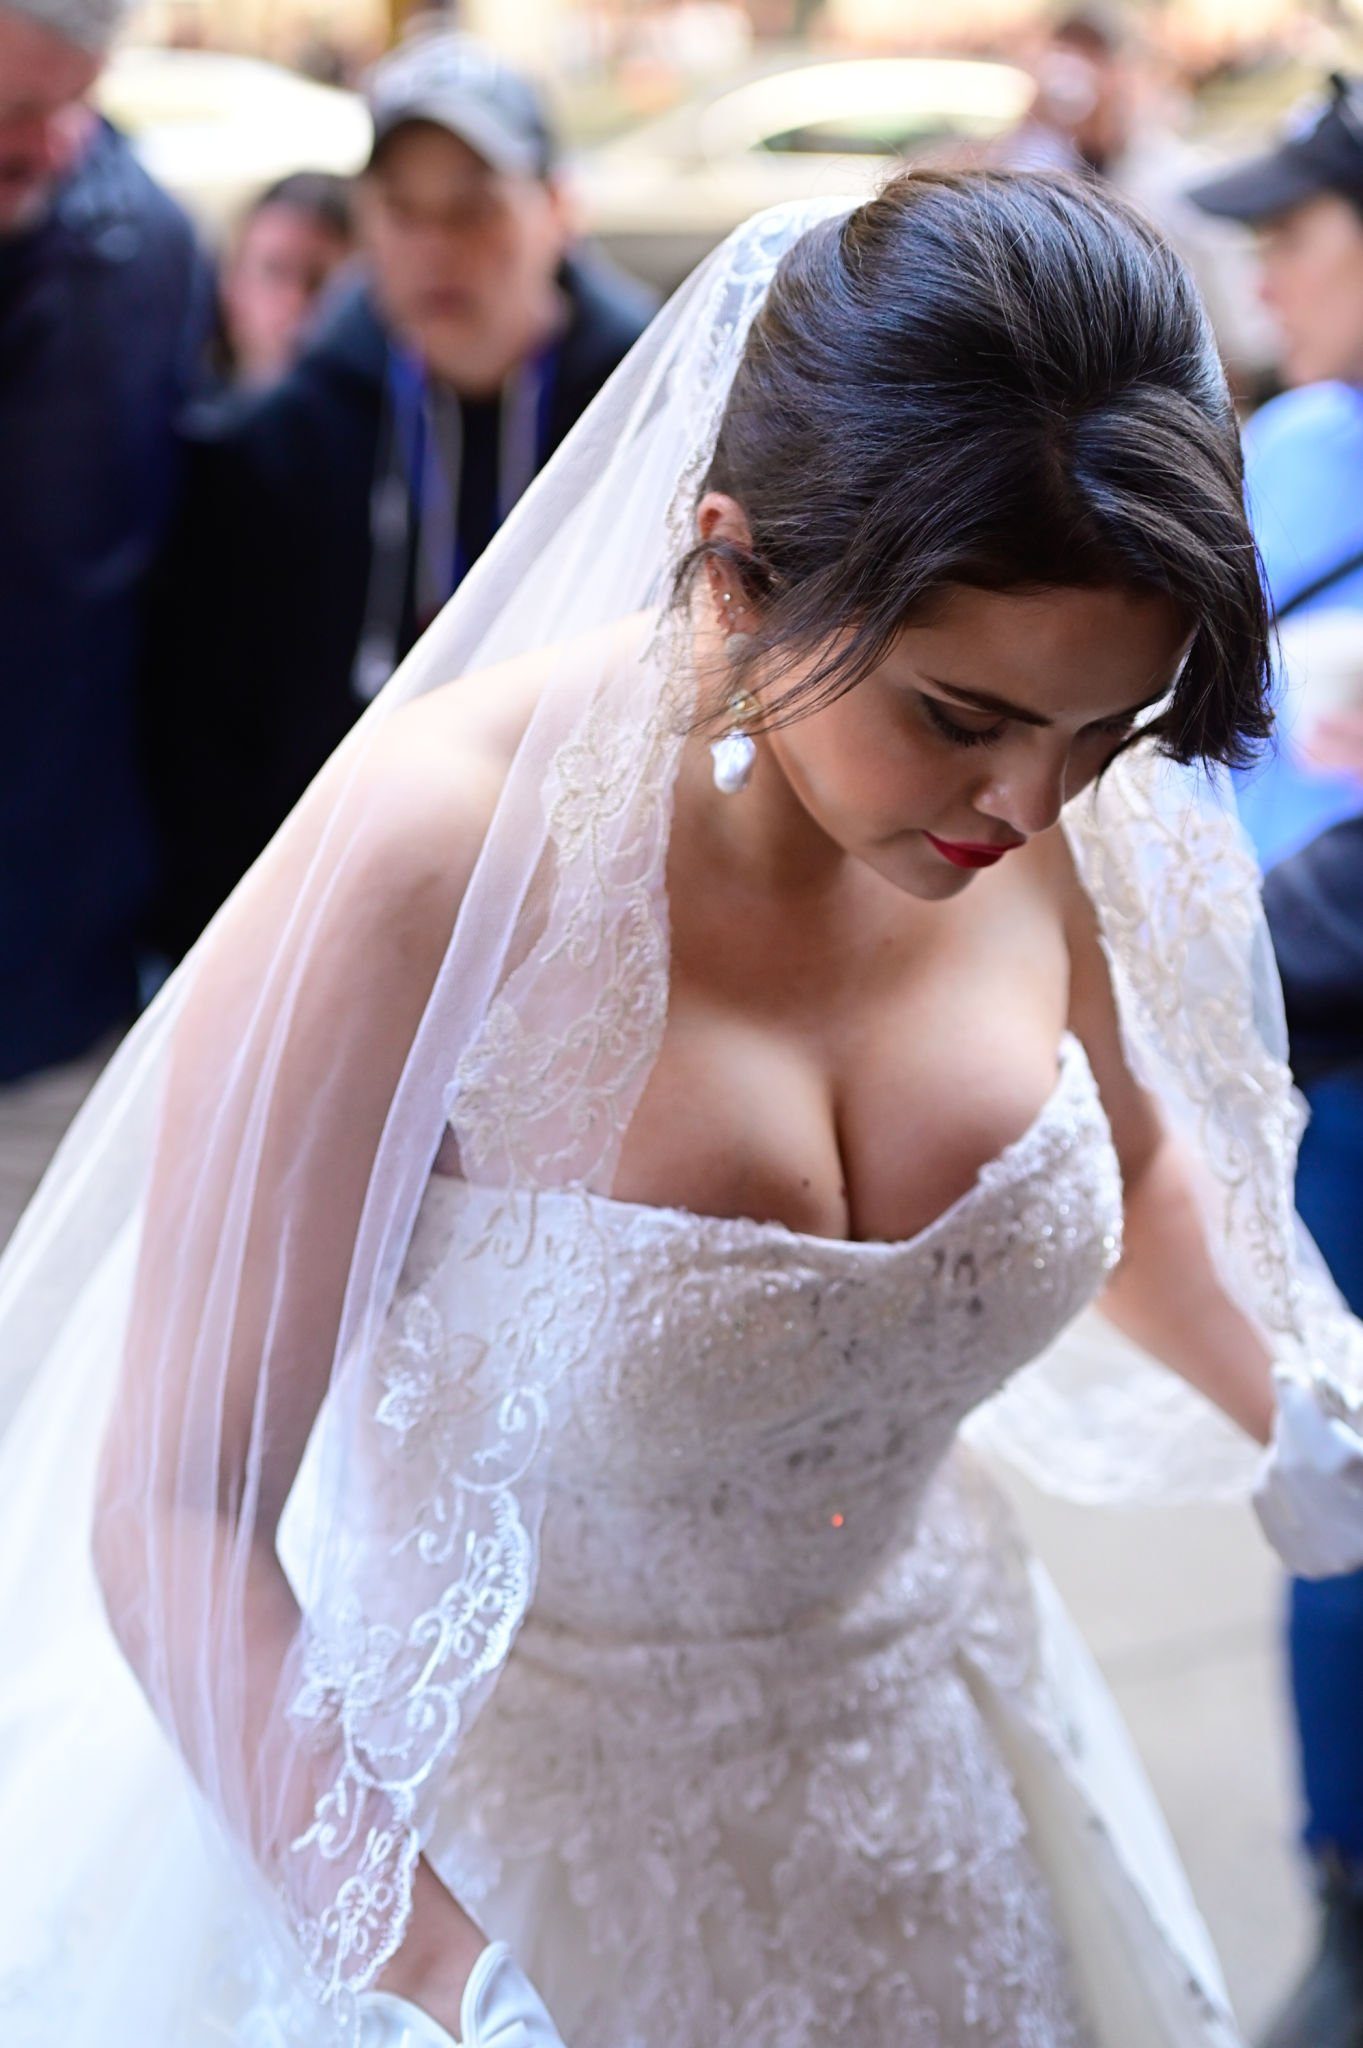 Selena Gomez falls out of a wedding dress - Other Crap